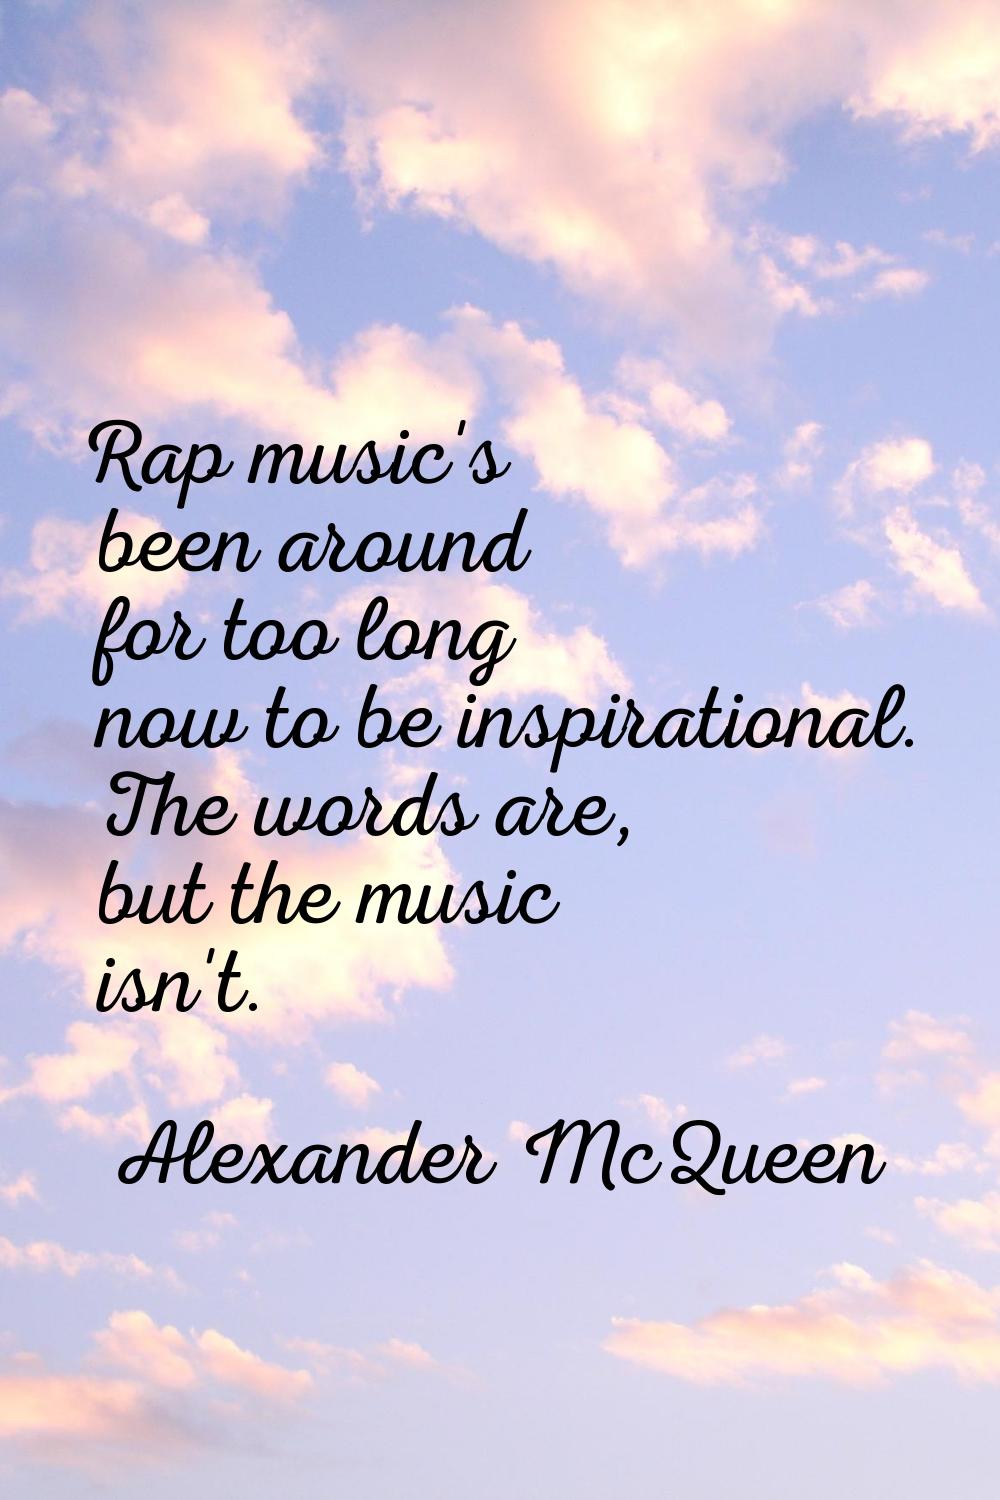 Rap music's been around for too long now to be inspirational. The words are, but the music isn't.